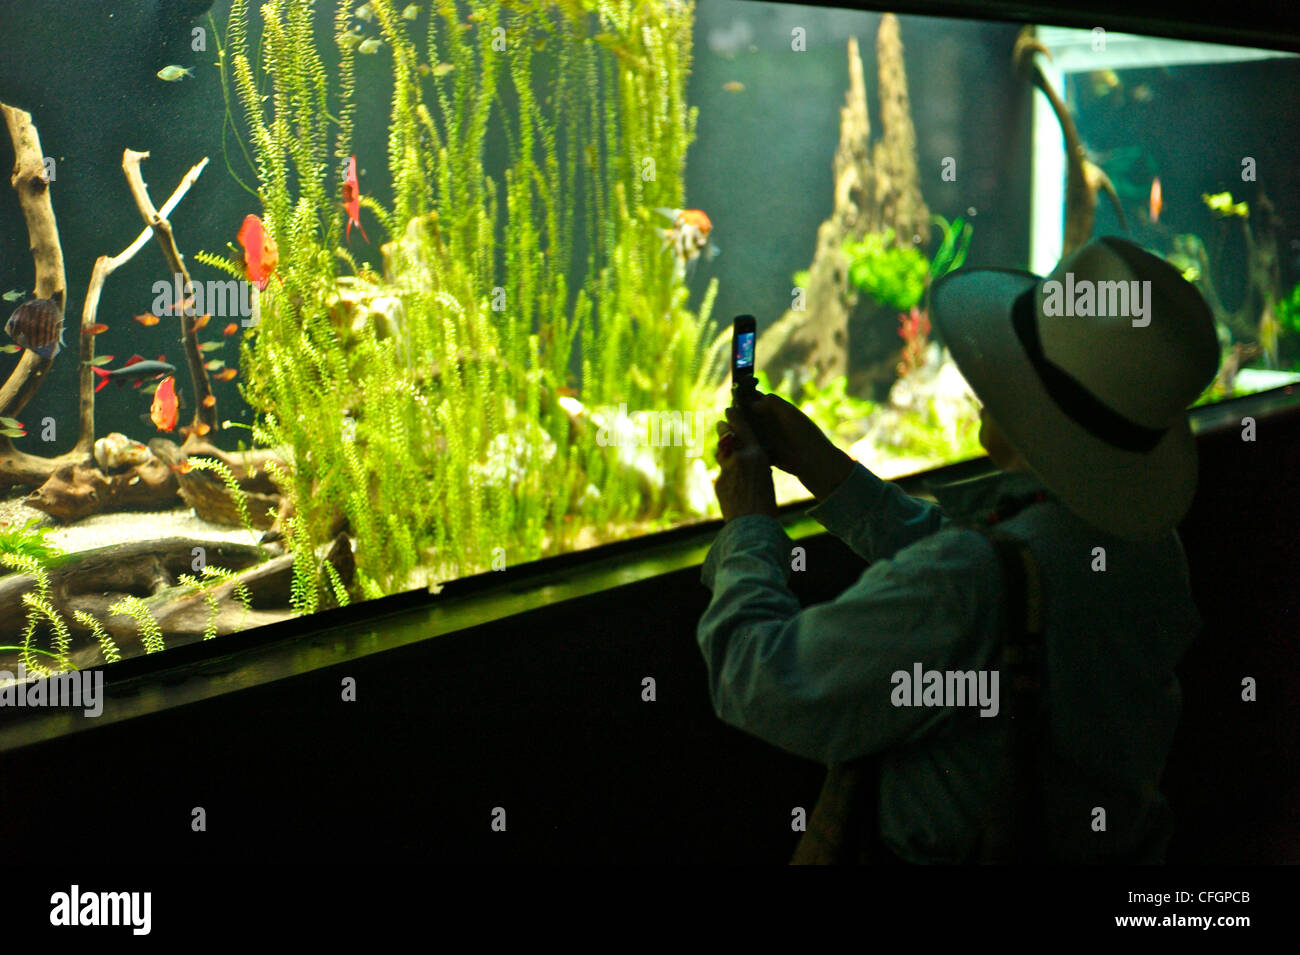 Photographing fish with a cell phone in an aquarium at Parque Explora. Stock Photo